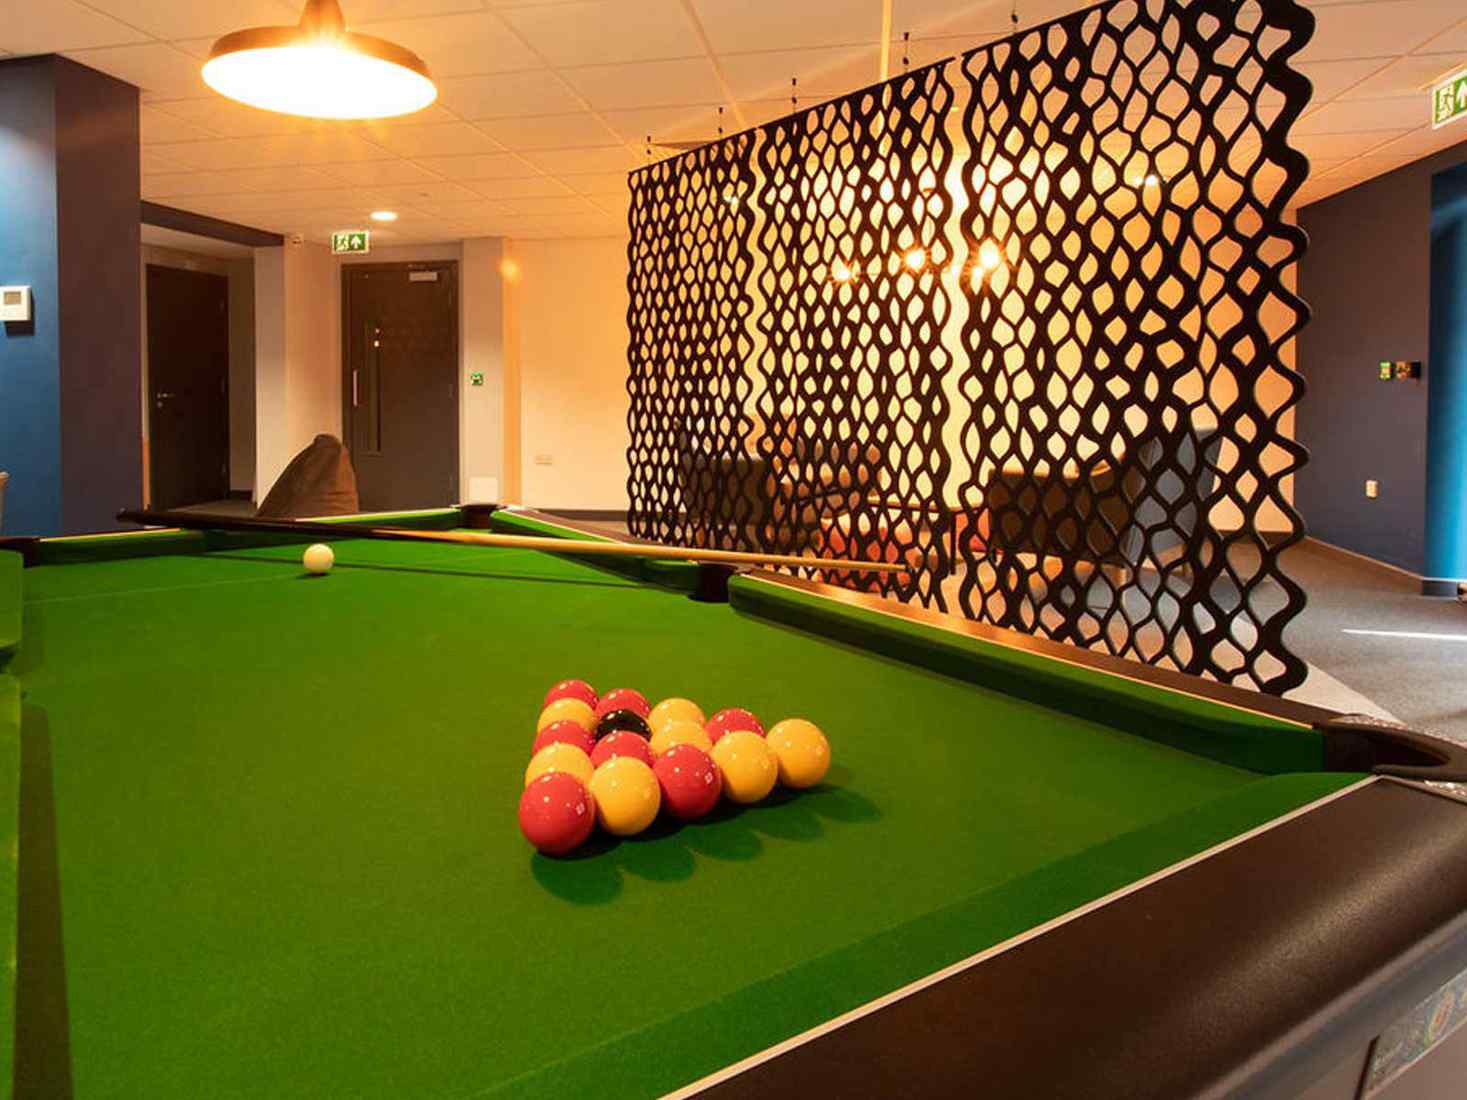 Common room with pool table in Abode accommodation site. 